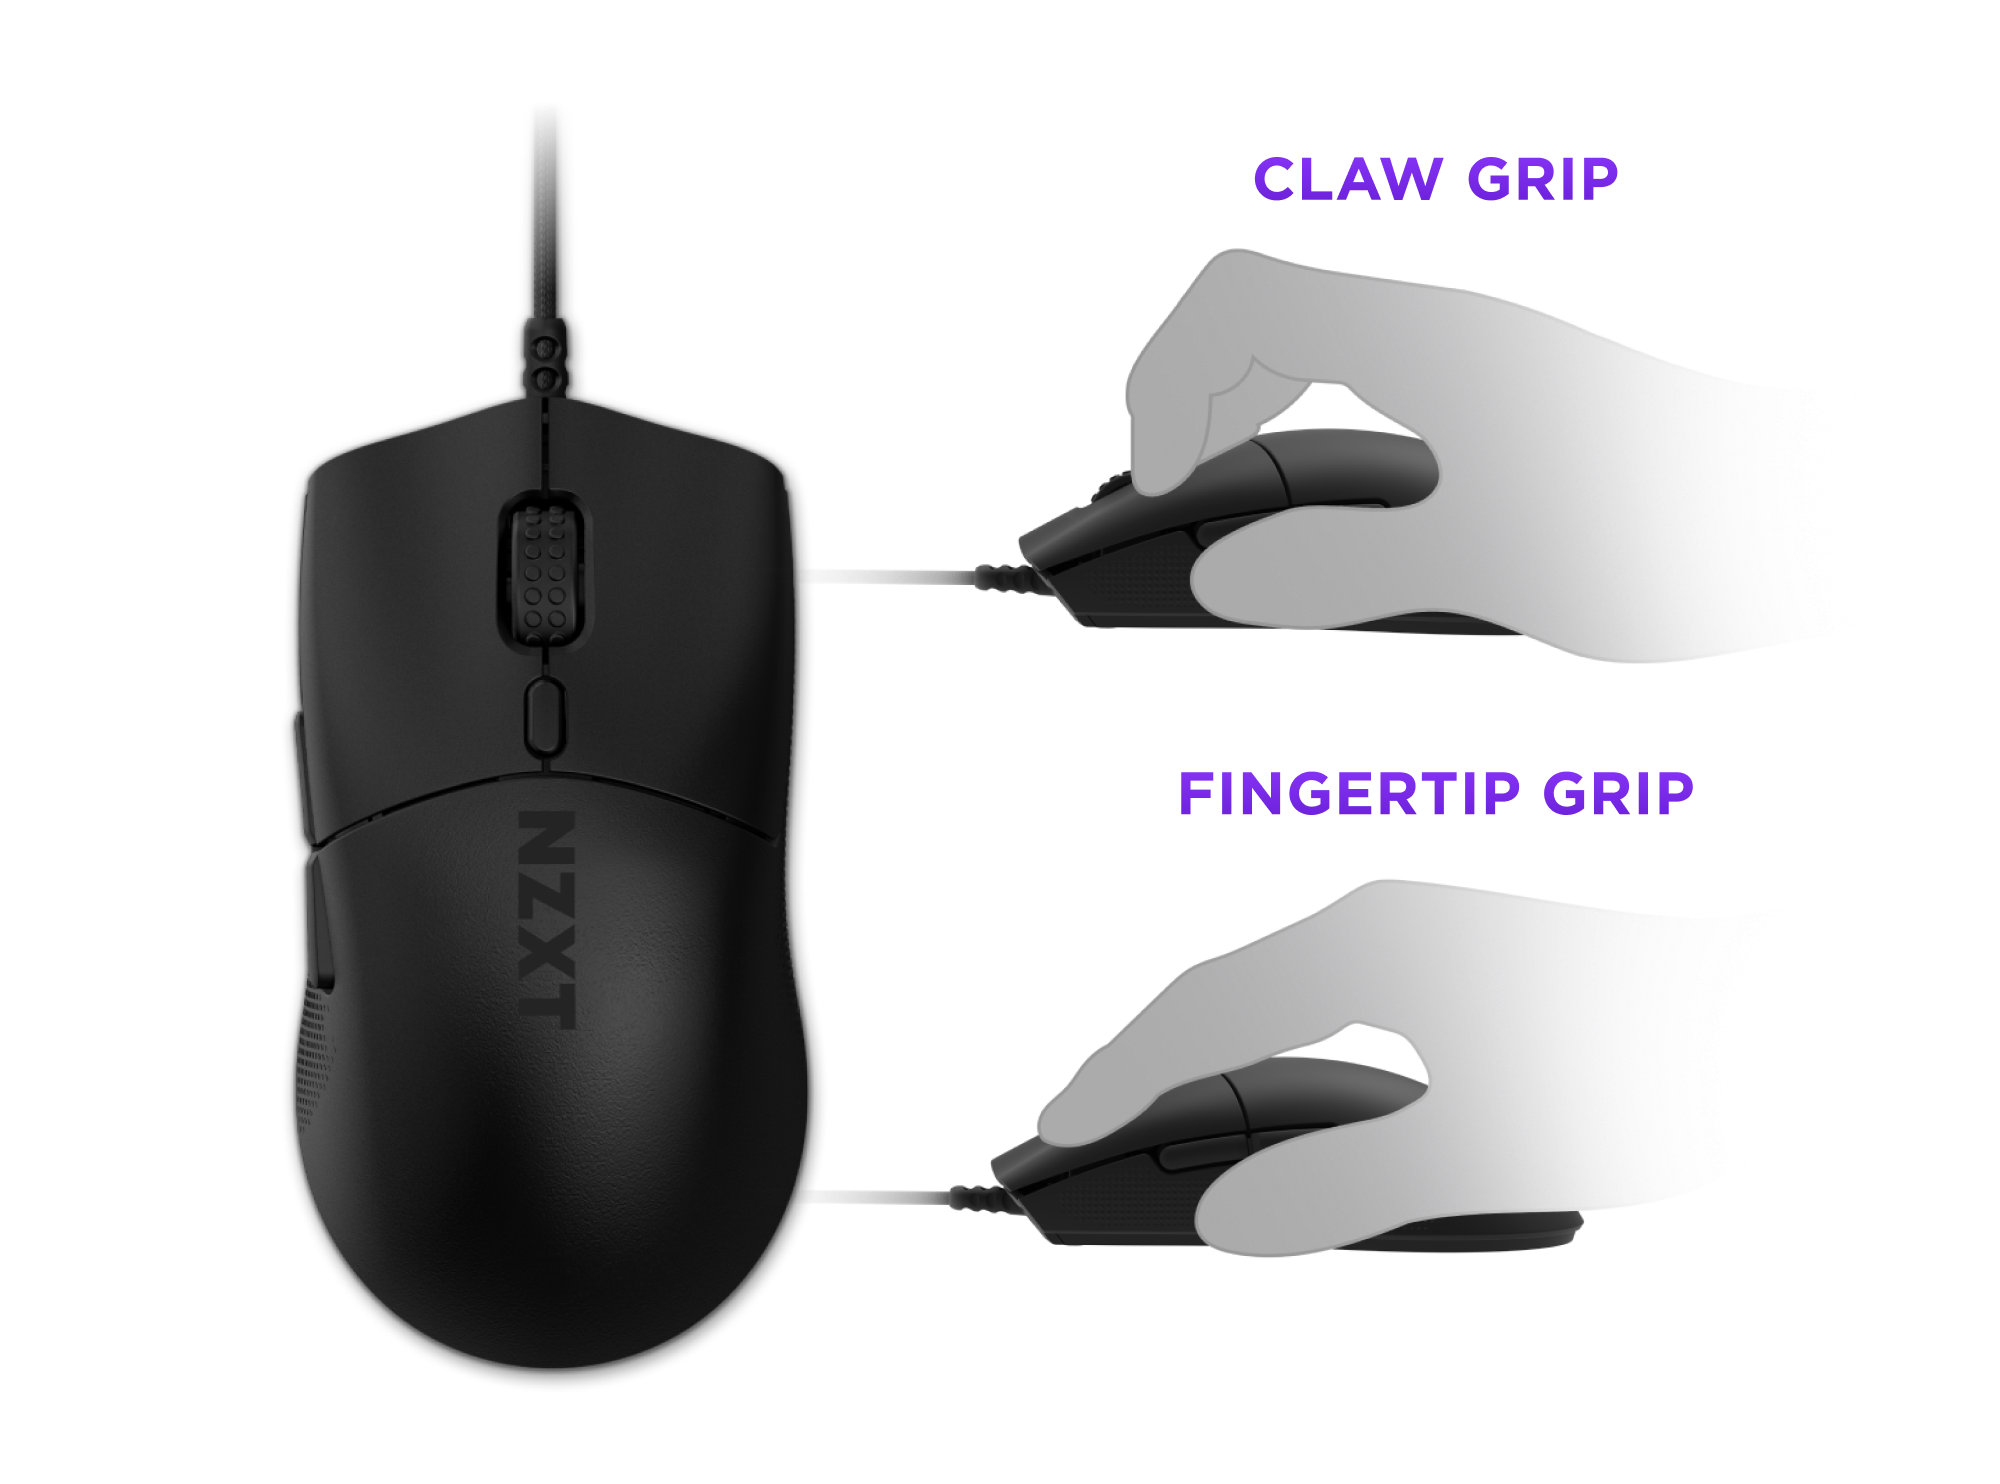 Computer Mice - Wireless Mouse, Bluetooth, Wired